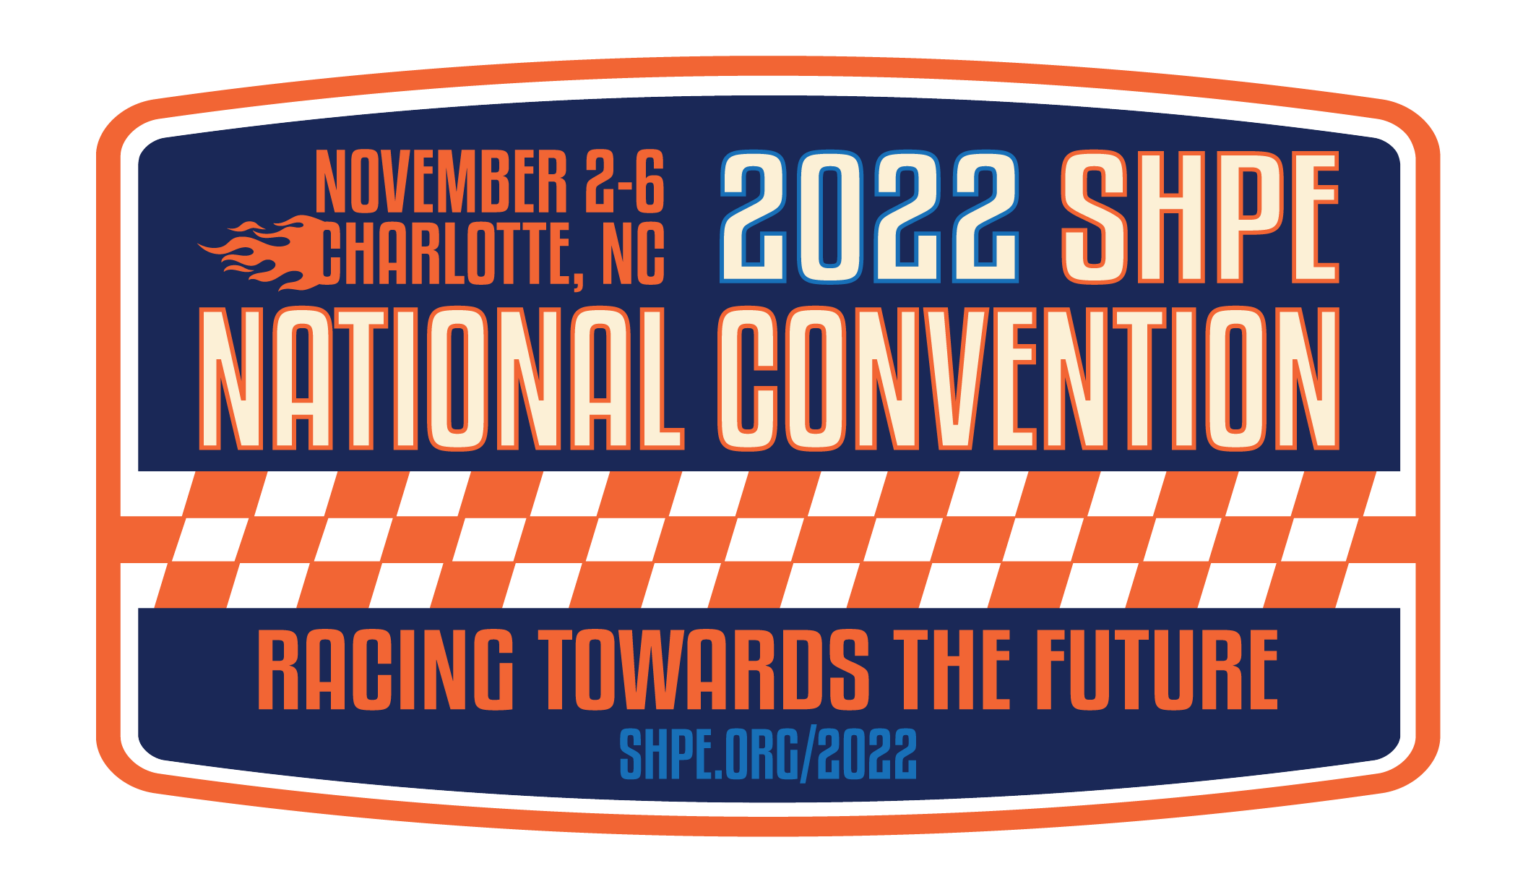 National Convention SHPE 2022 Annual Report